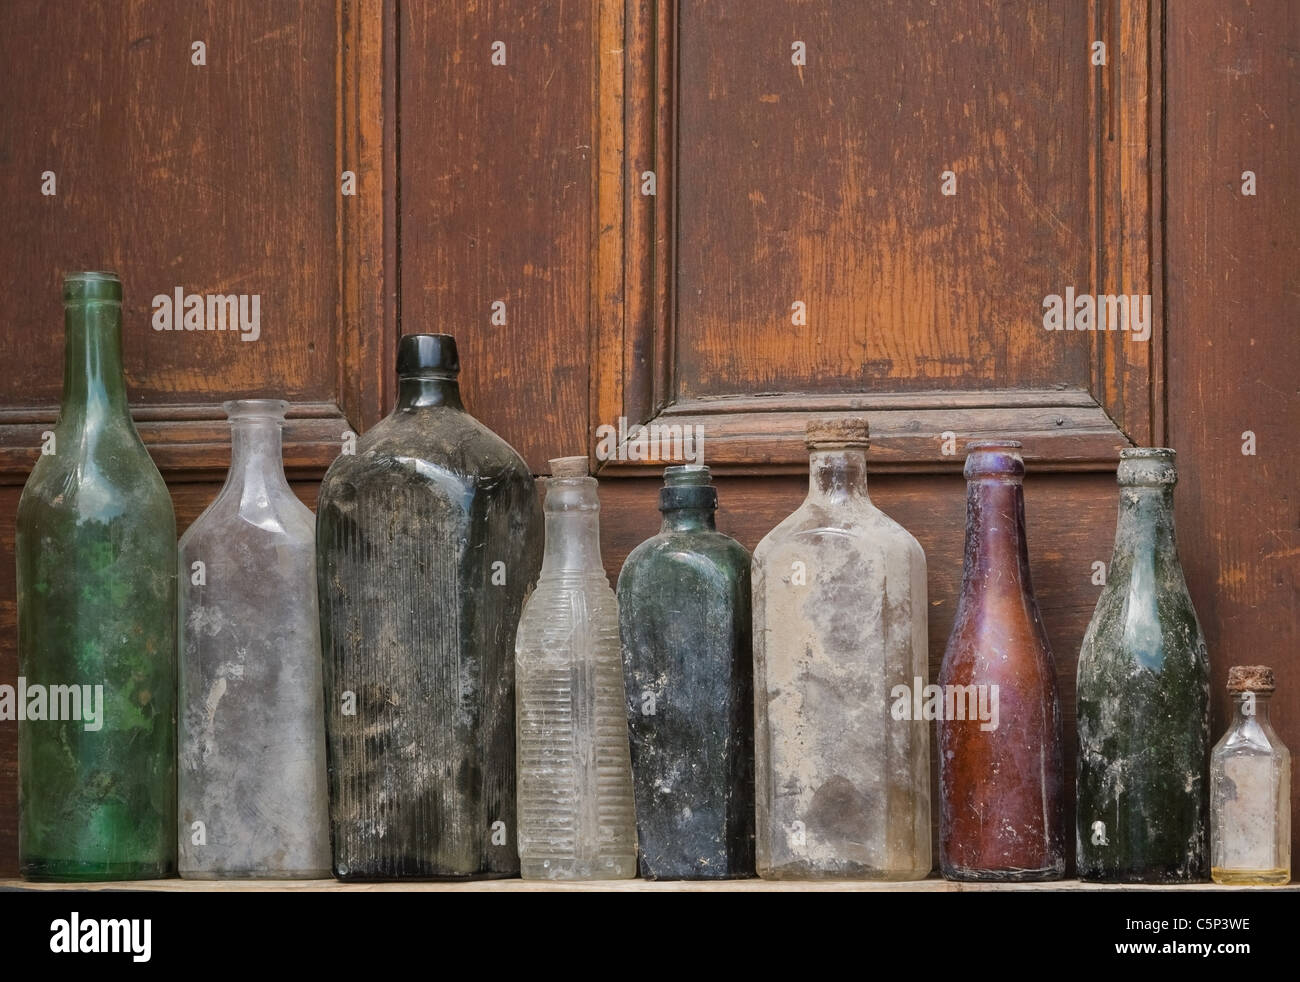 Download Antique Glass Bottles High Resolution Stock Photography And Images Alamy Yellowimages Mockups